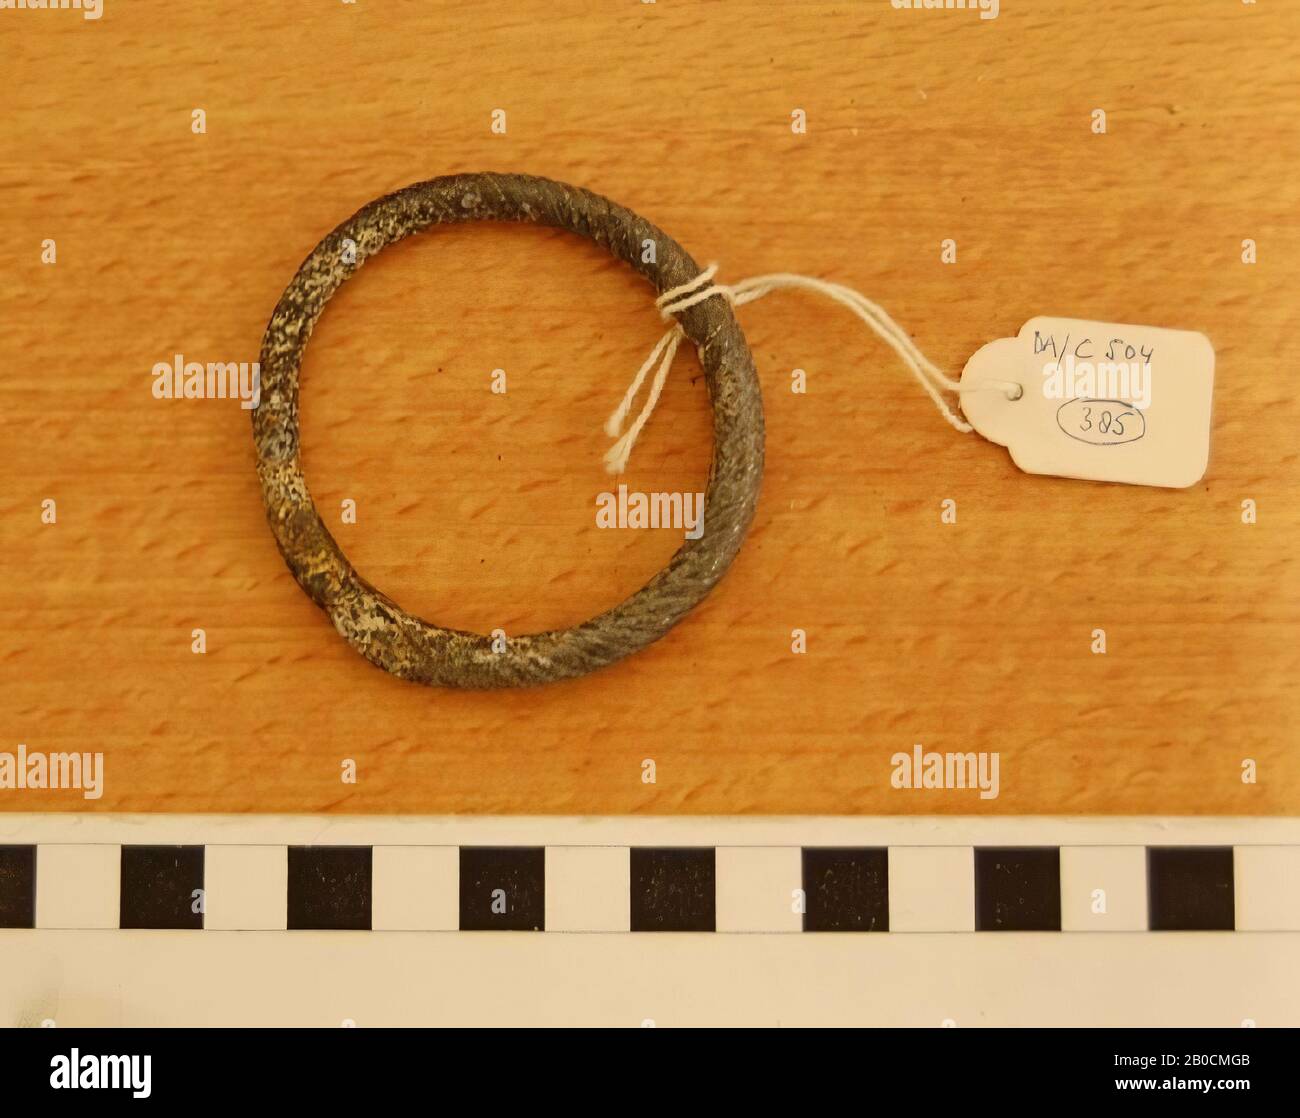 Glass hair, arm or anklet, twisted, grave inventory, ornament, glass, black, D 6.1 cm, thickness 0.7 cm, Islamic Period 1250-1600 AD, Jordan Stock Photo